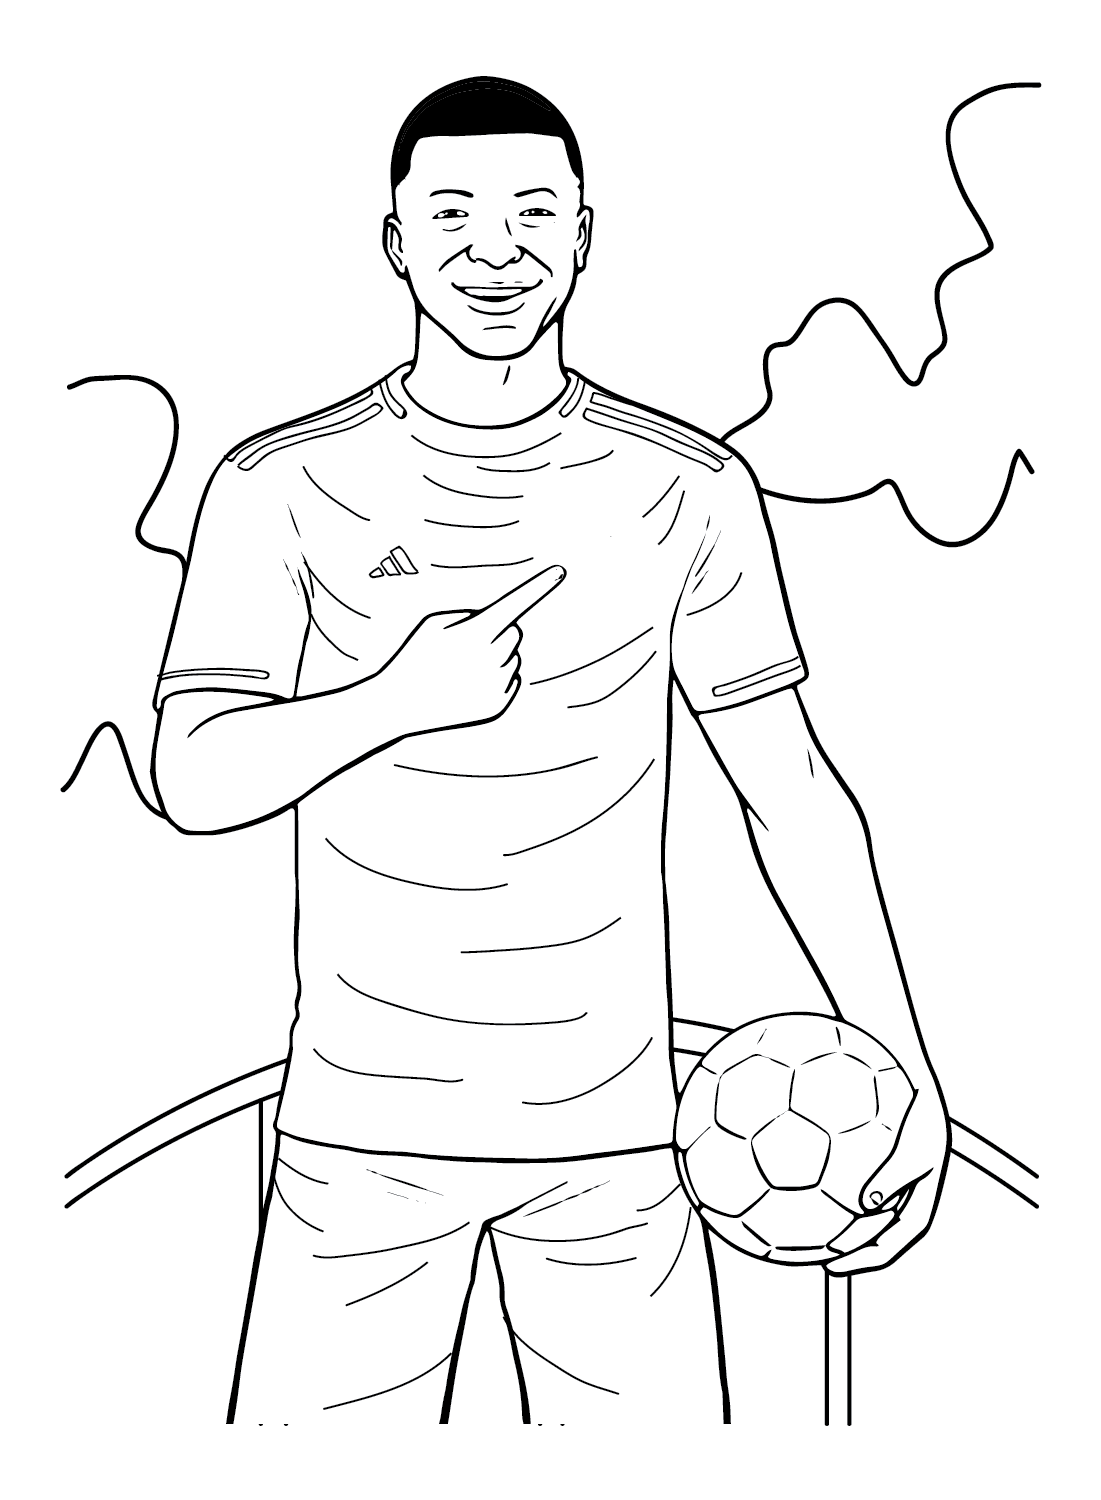 Kylian Mbappé Free Coloring Pages